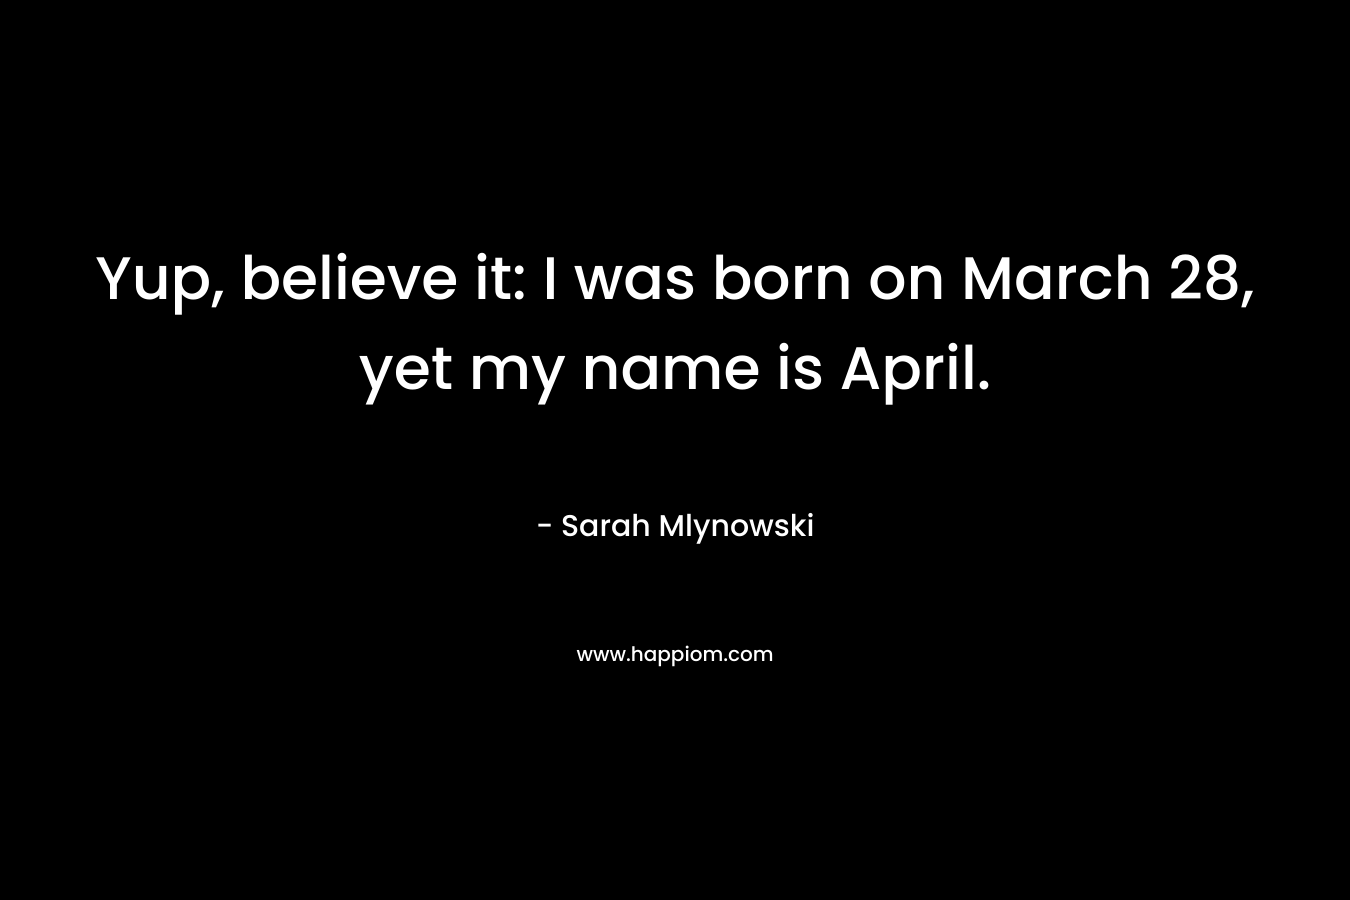 Yup, believe it: I was born on March 28, yet my name is April.